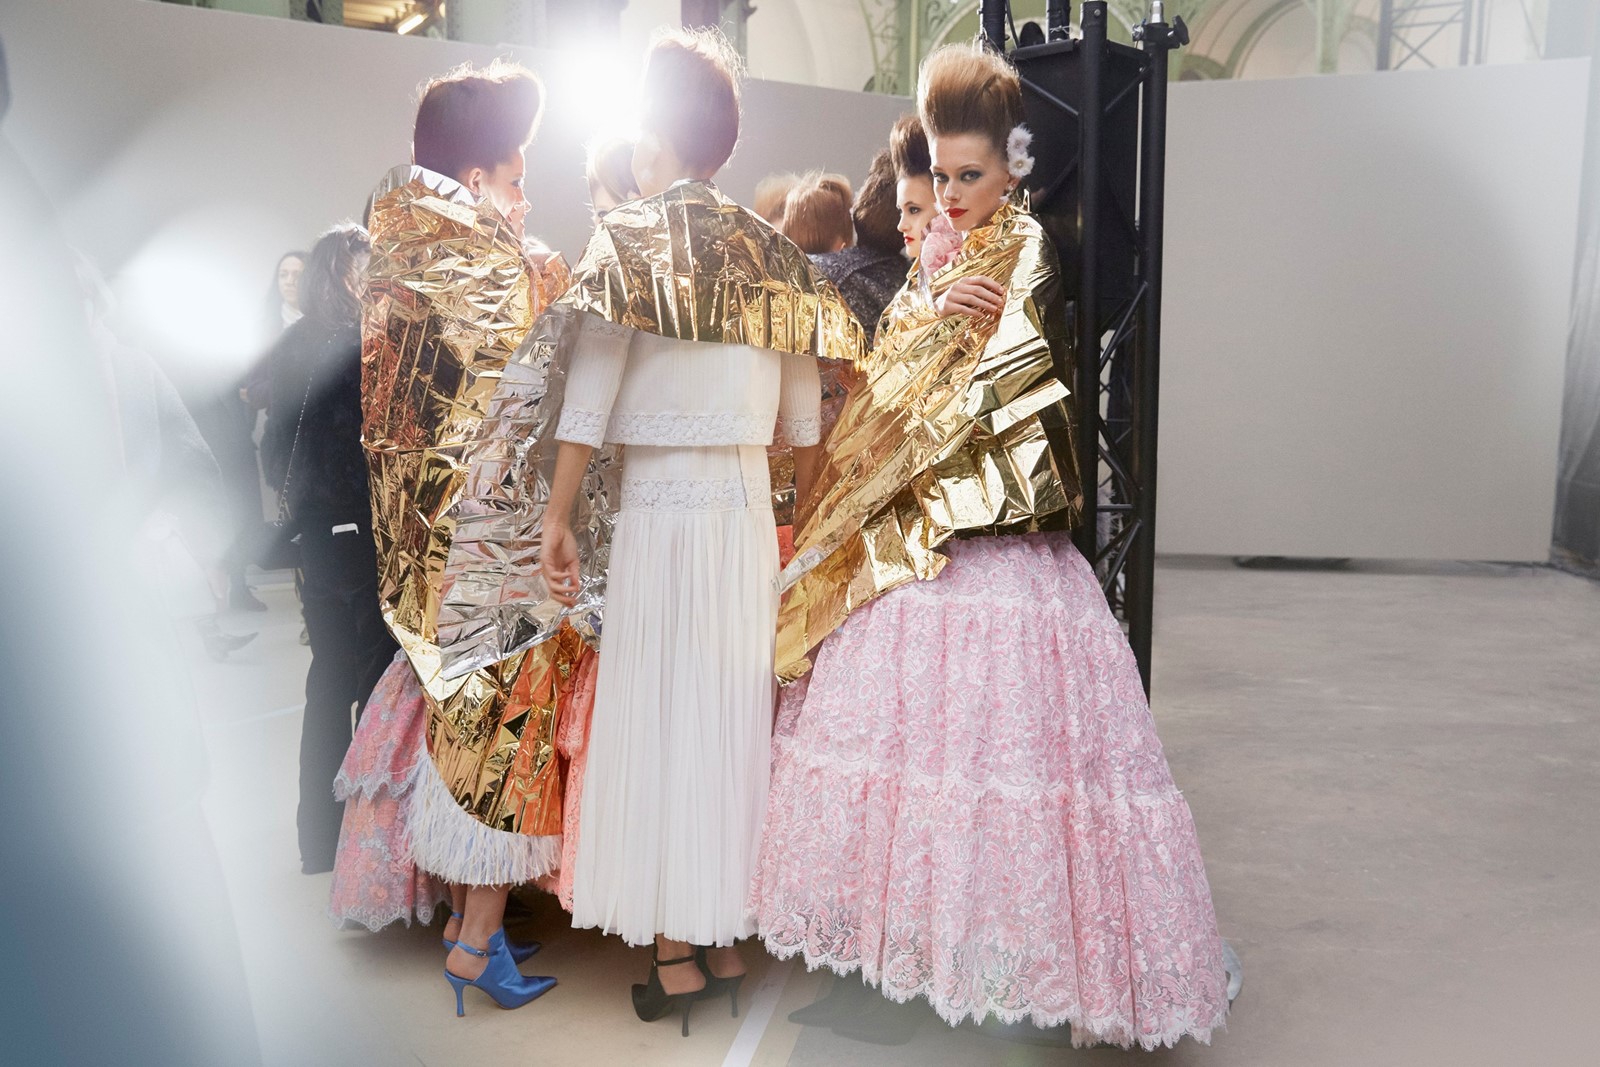 SS 2019 HC - Backstage pictures by Benoit Peverell